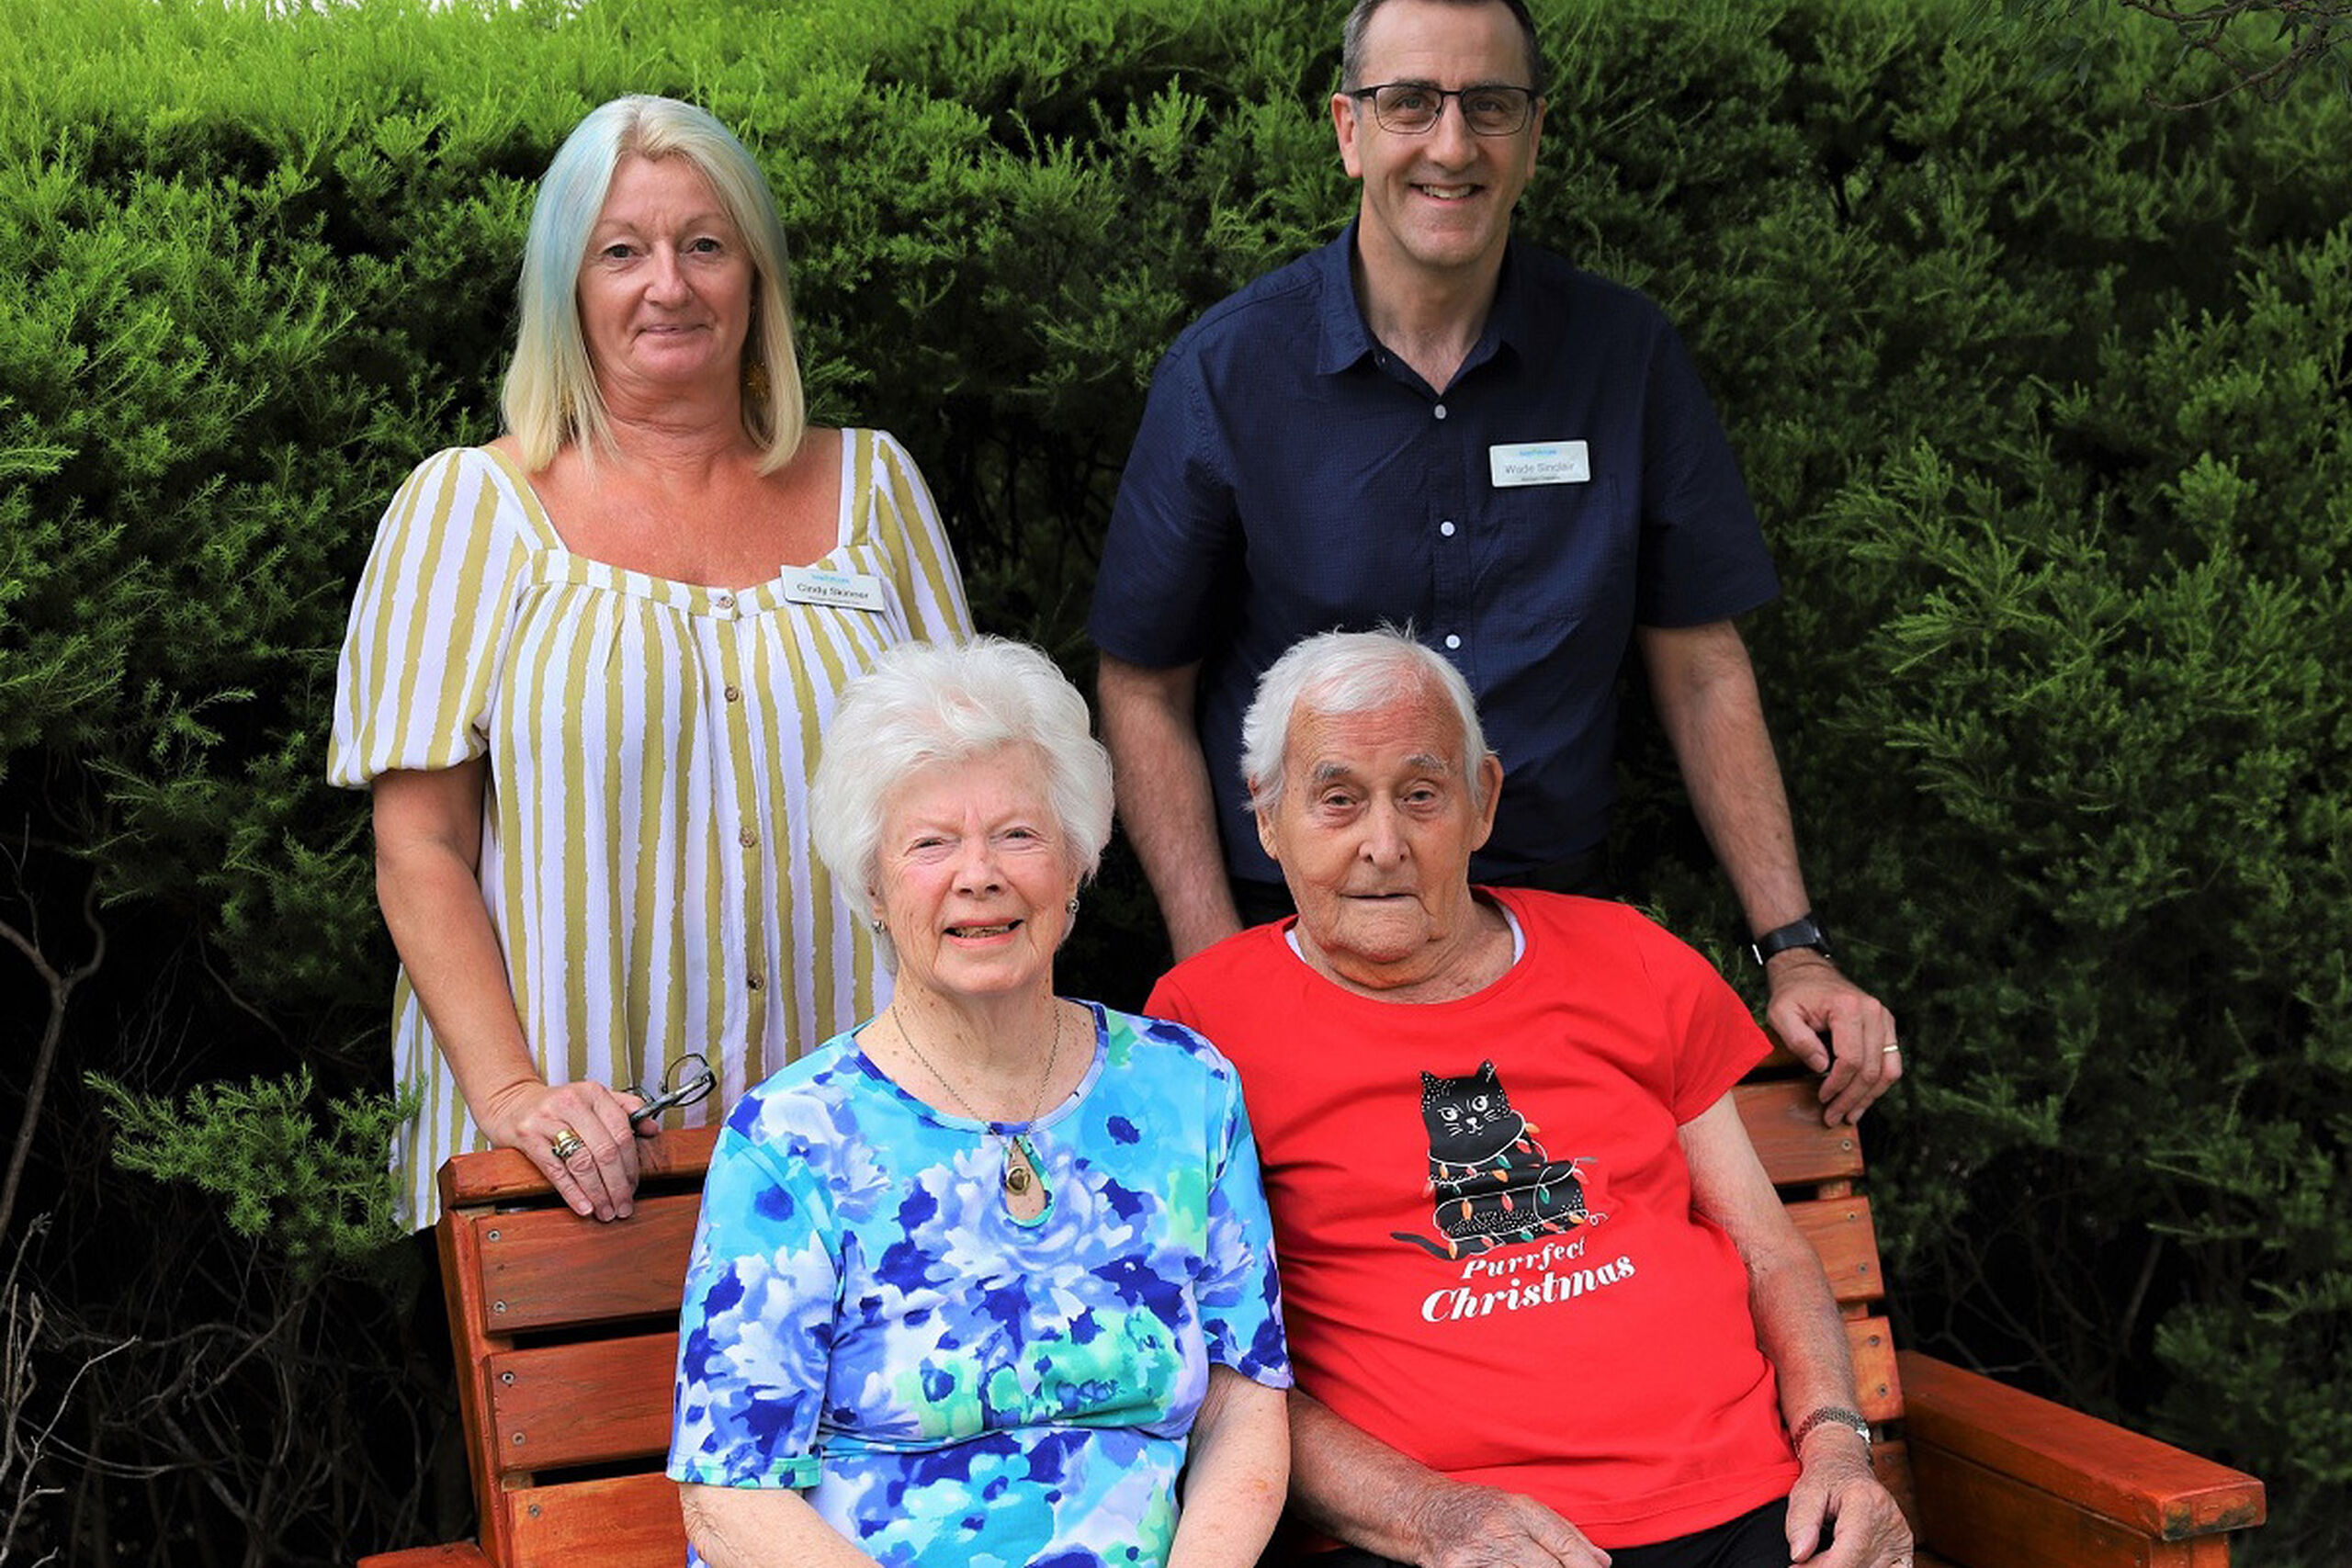 A gift that will keep on giving for Mundaring residential care residents